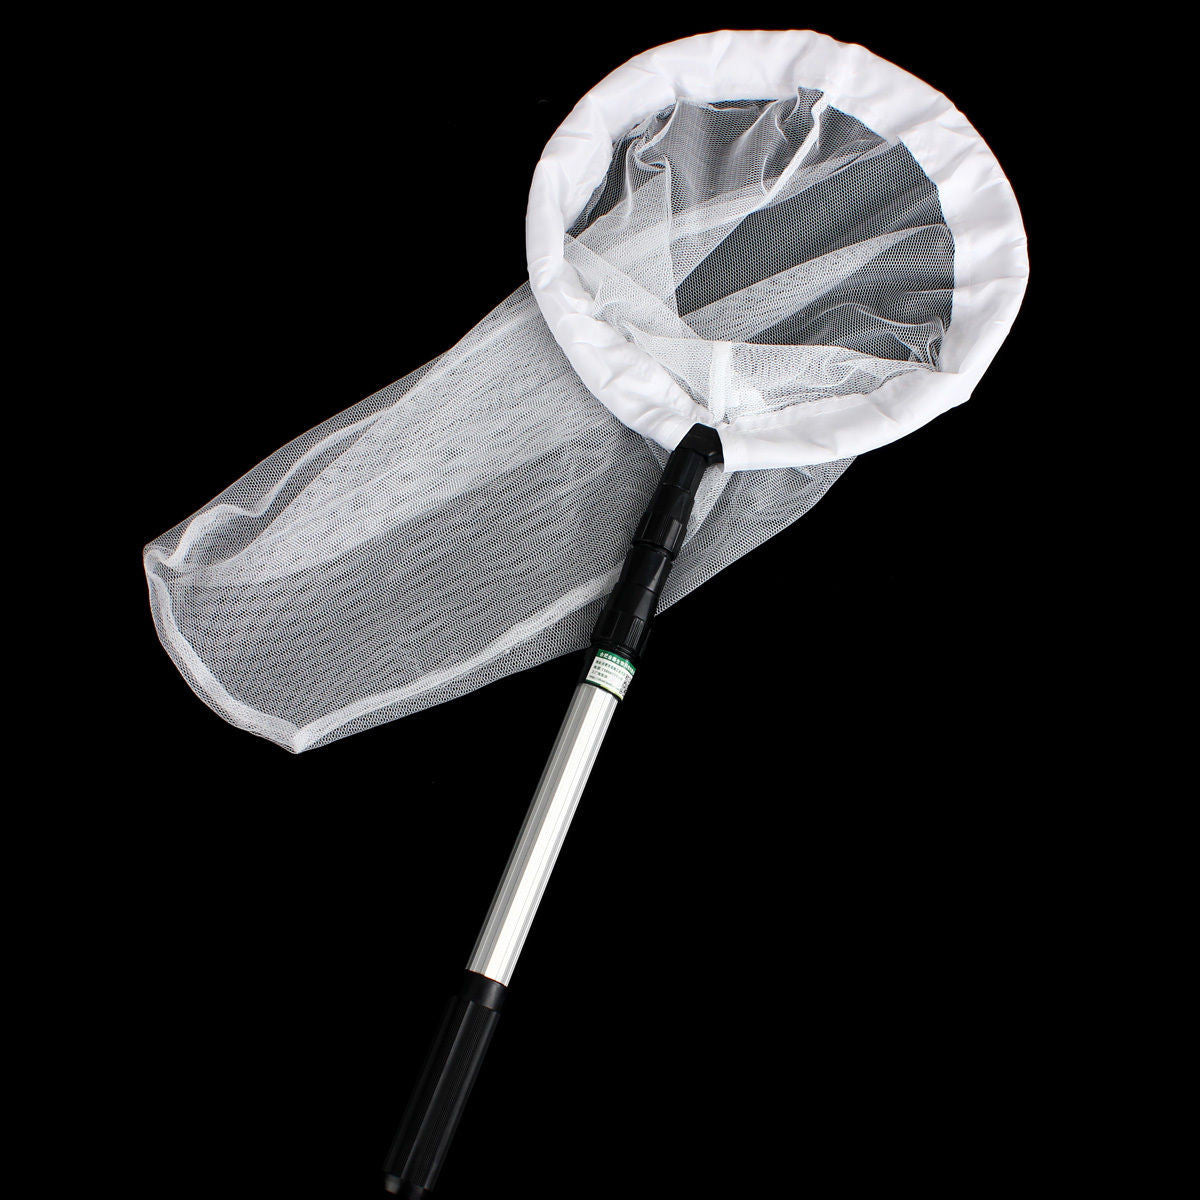 Extendable Telescopic Handle Bug Butterfly Insect Net, Folding